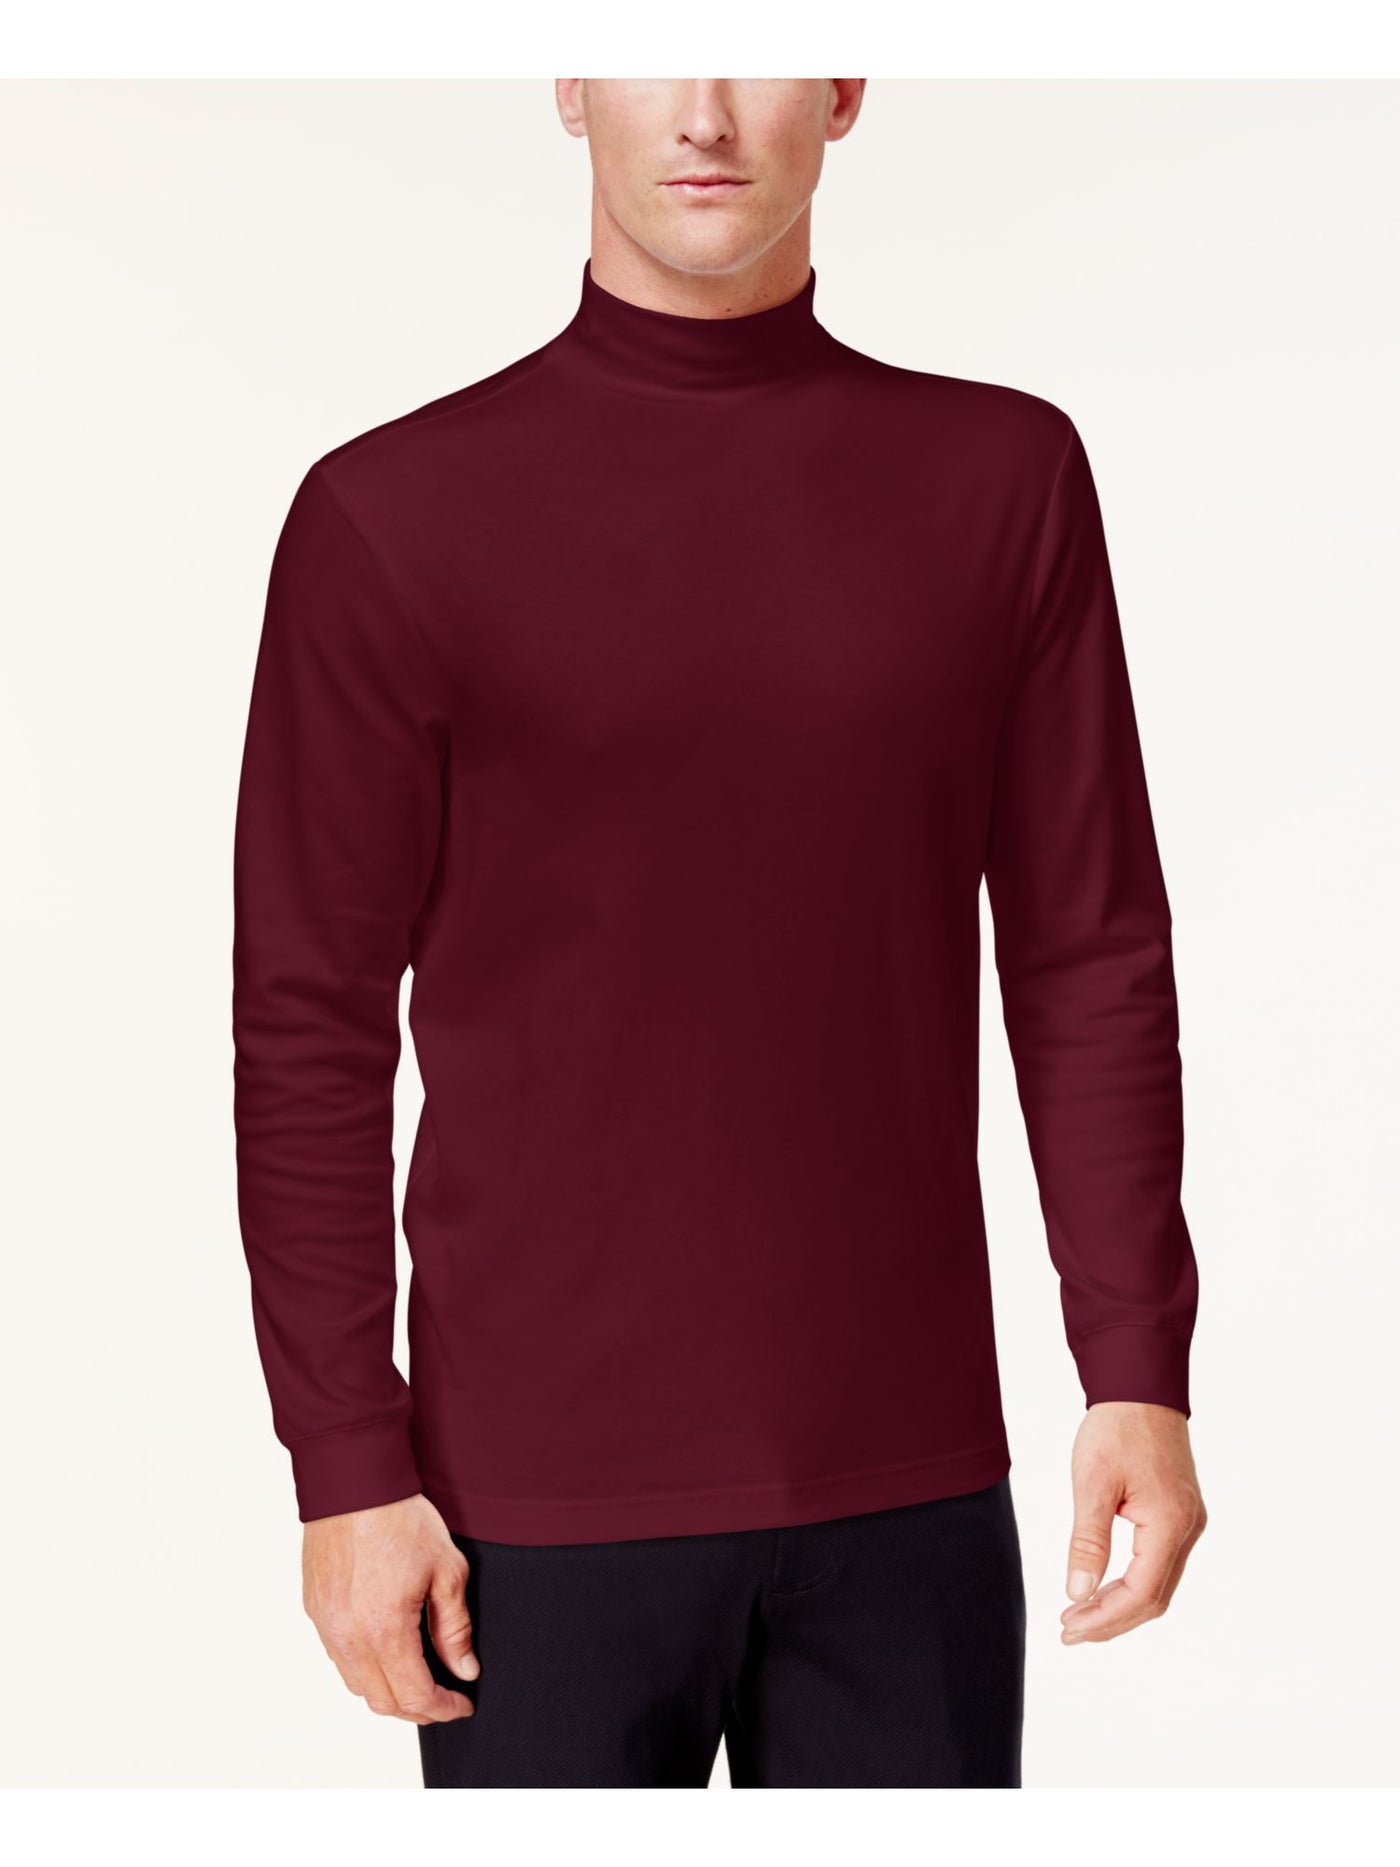 CLUBROOM Mens Maroon Long Sleeve Classic Fit Cotton Casual Shirt XXL